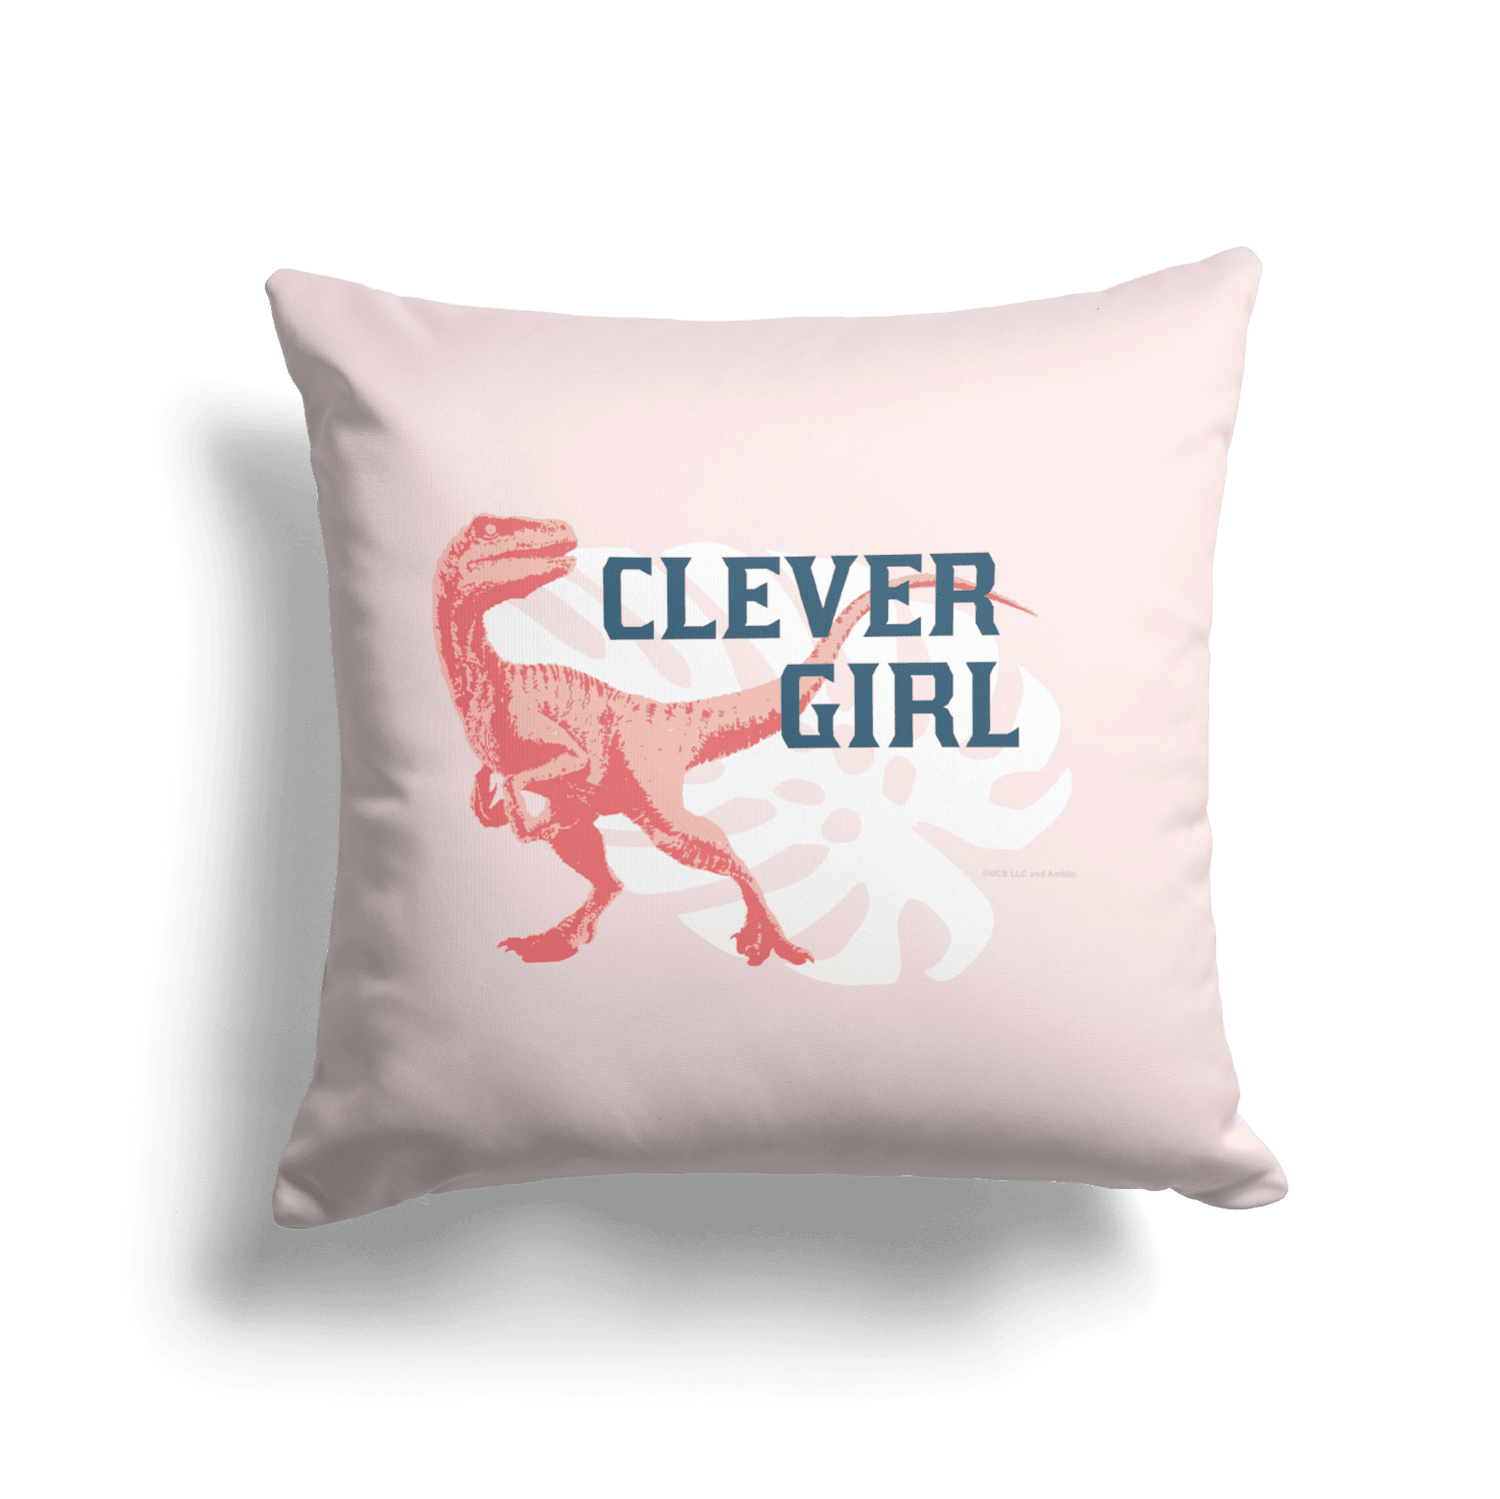 Jurassic World Clever Girl Square Cushion